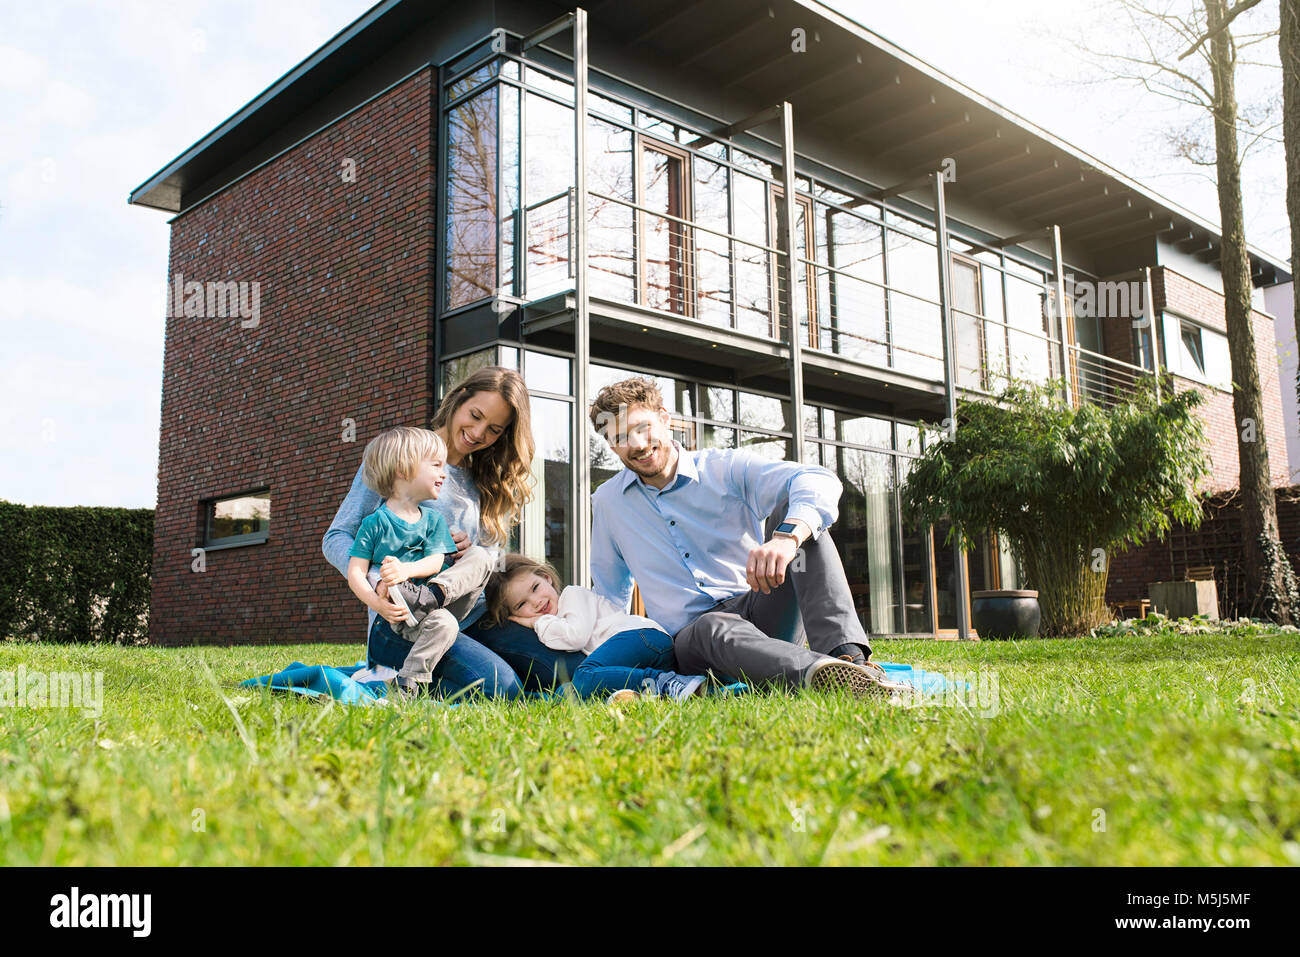 Portrait of smiling family on blanket in garden in front of their home Stock Photo